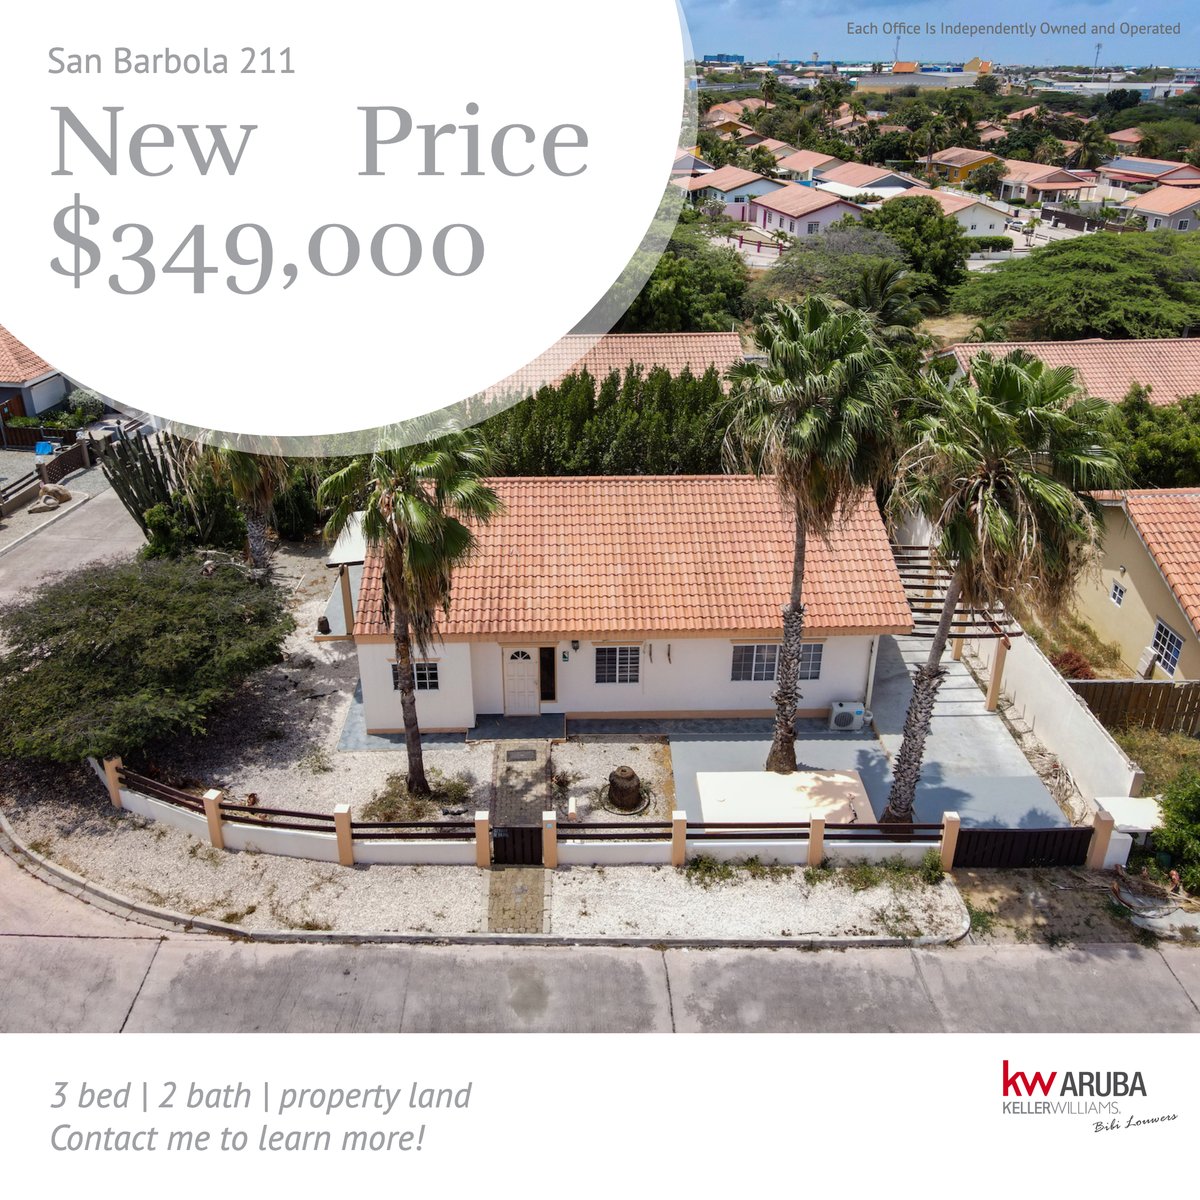 🌴🏠 Just Reduced! 🏠🌴
.
🛏️ 3 Bedrooms
🛁 2 Bathrooms
🌳 505m² of Property Land
kw-aruba.com/listings/san-b…
.
Contact us for more details and to schedule a viewing. 🏖️🌅
.
#RealEstate #ArubaProperty #ReducedPrice #SanBarbola #Oranjestad #ArubaRealEstate